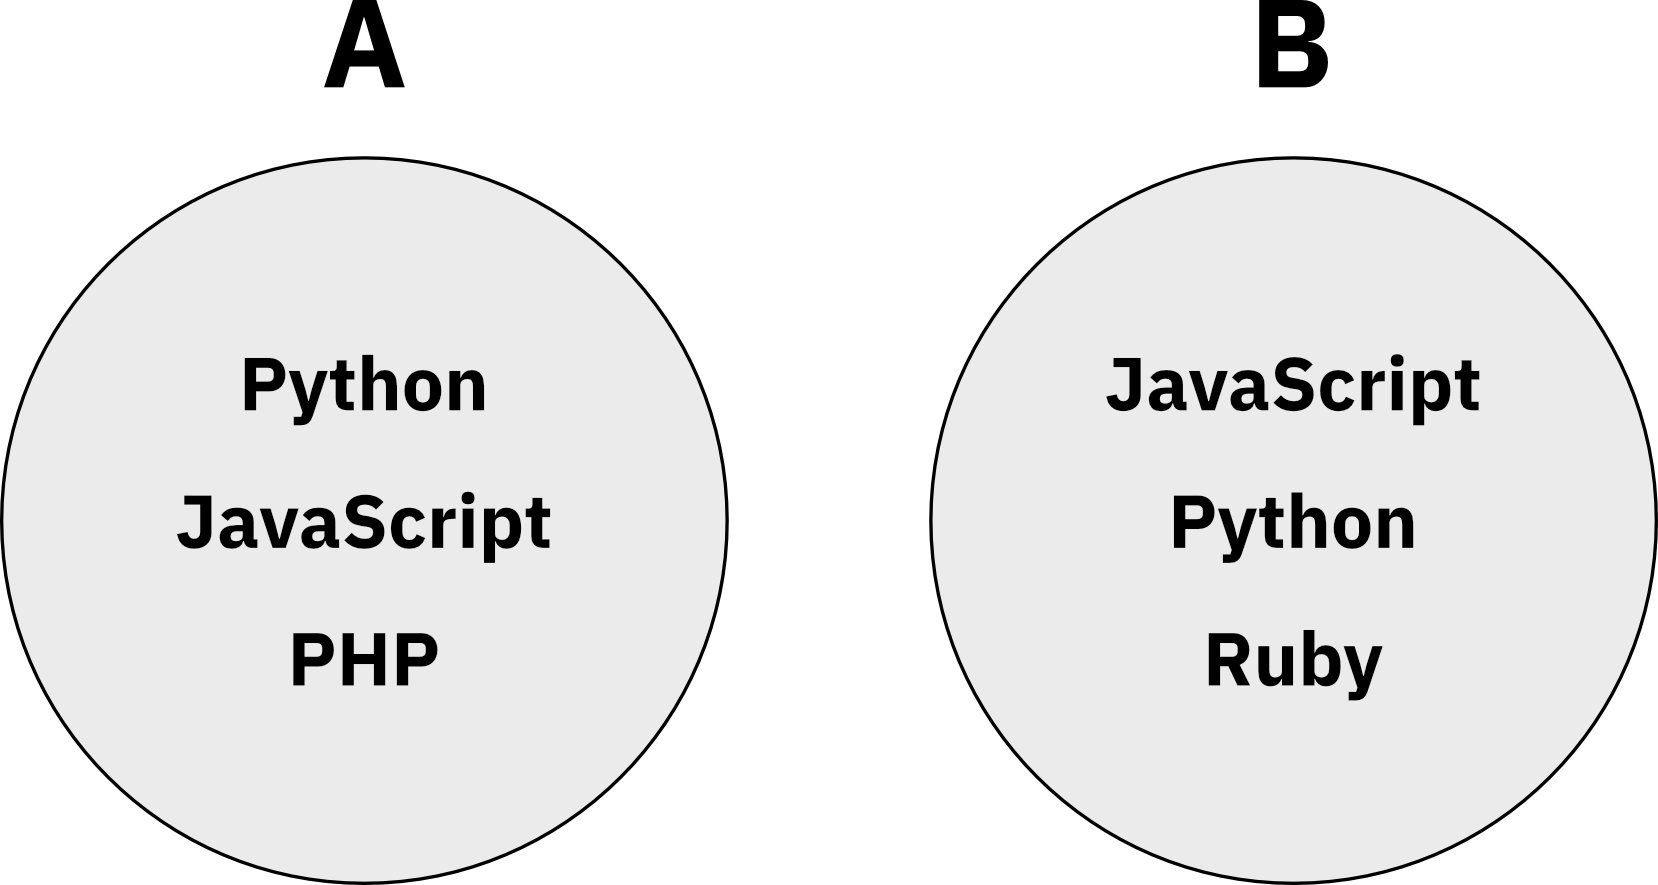 Image 1 - Two sets with programming languages (image by author)